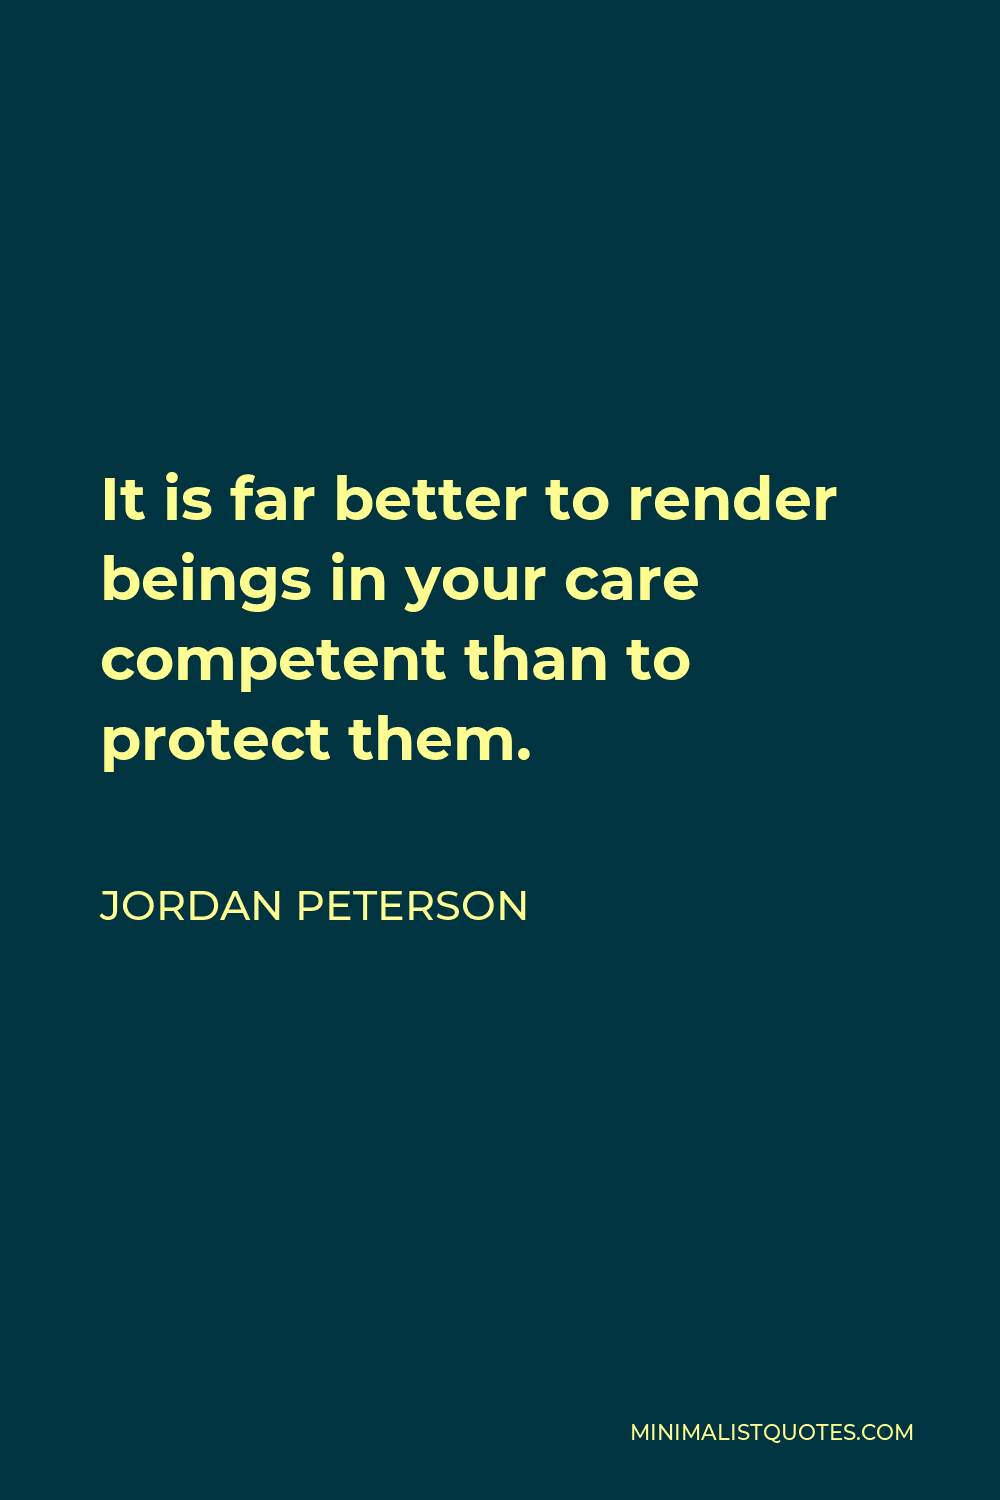 Jordan Peterson Quote - It is far better to render beings in your care competent than to protect them.